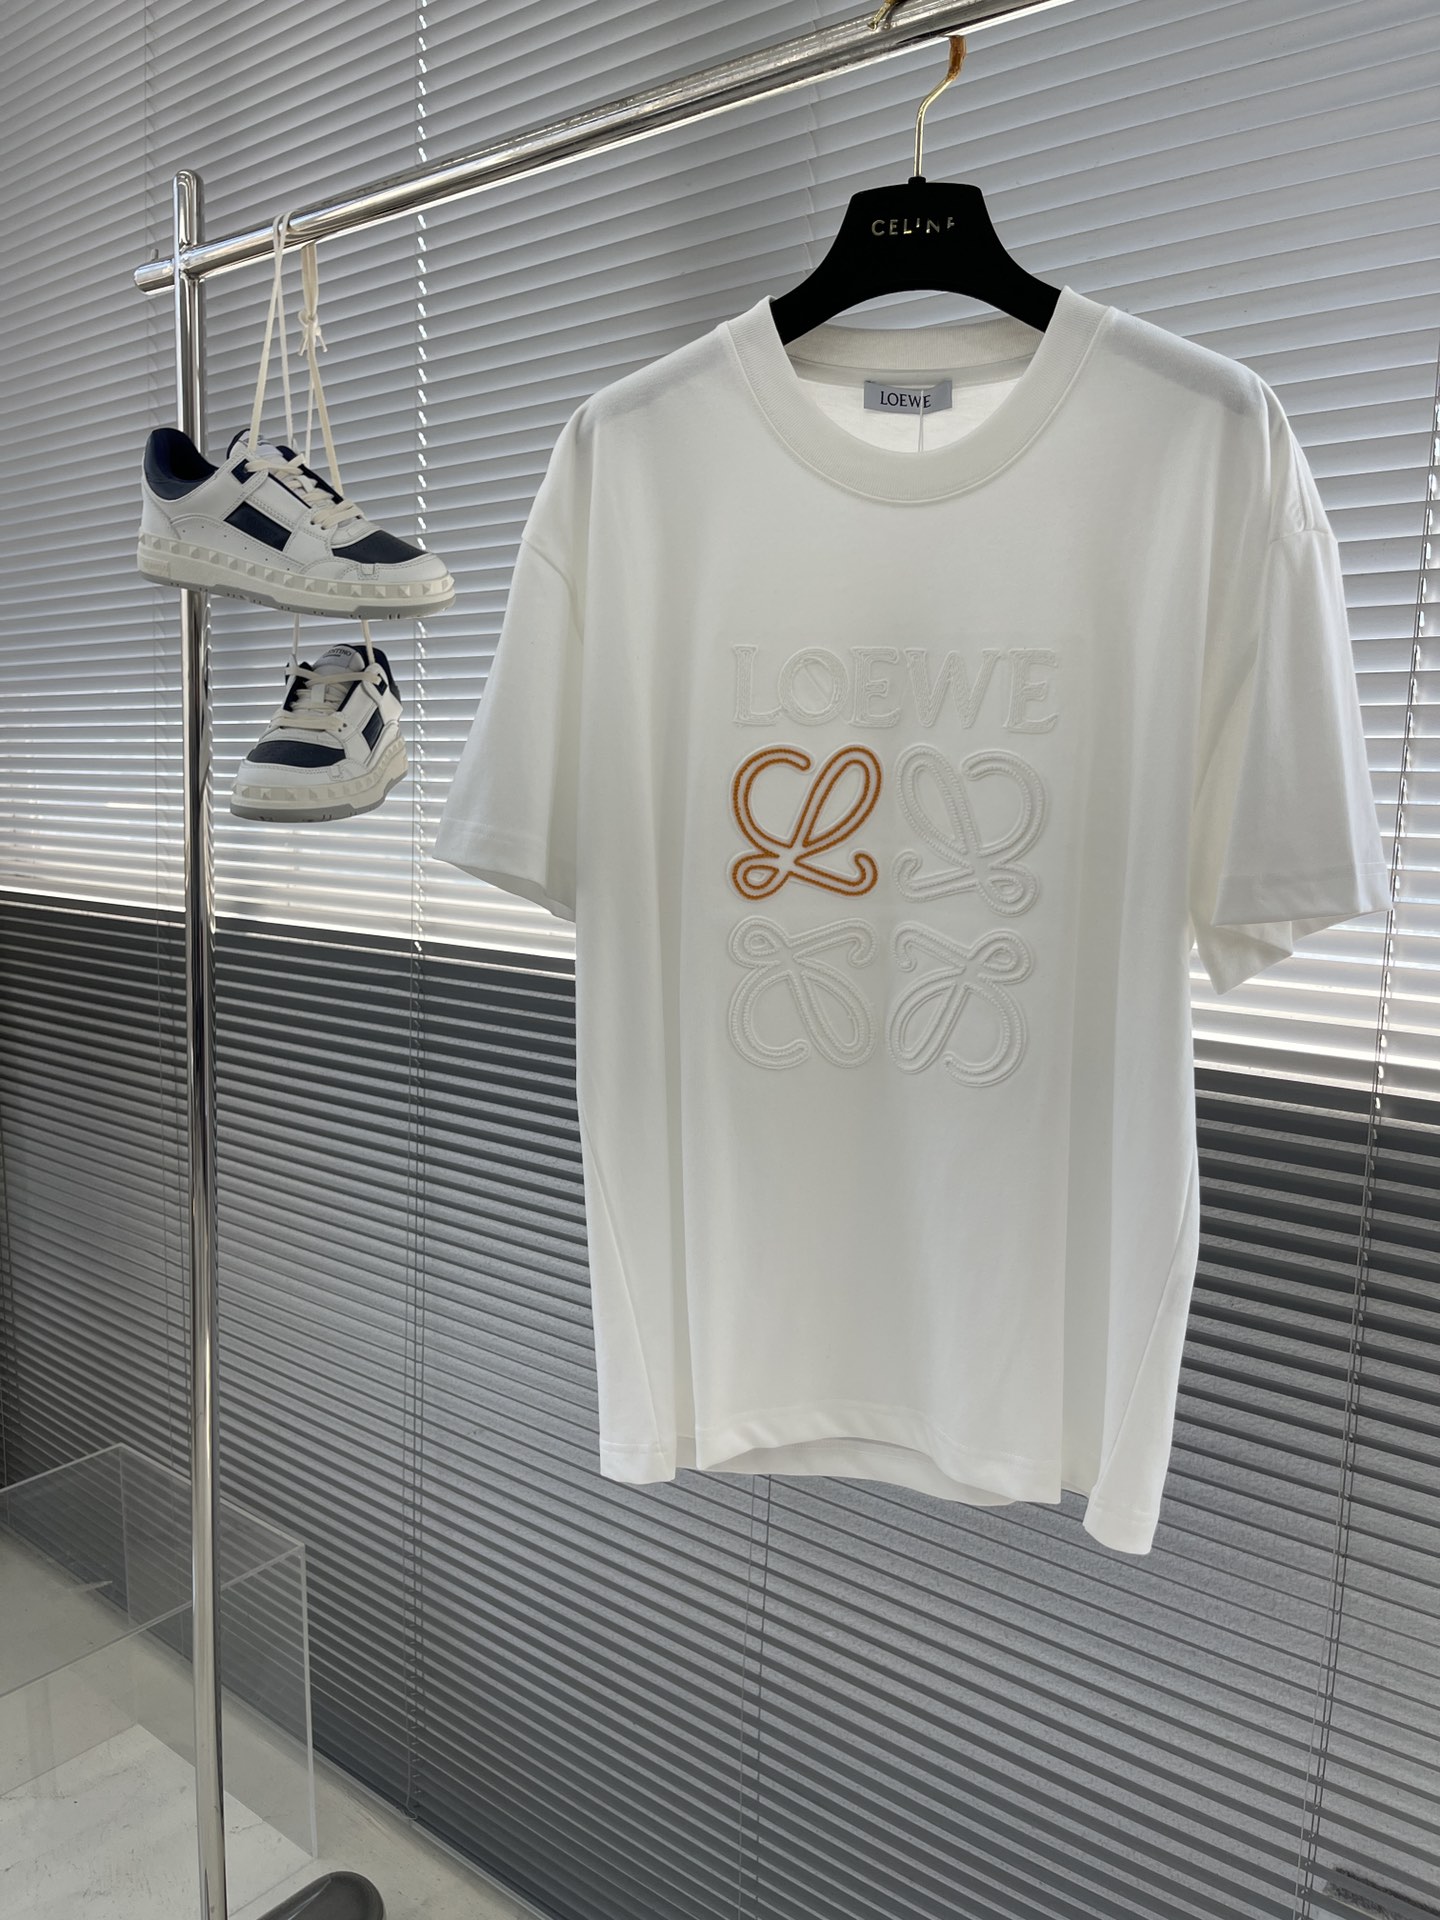 Same as Original
 Loewe Clothing T-Shirt sell Online
 Embroidery Unisex Cotton Summer Collection Fashion Short Sleeve